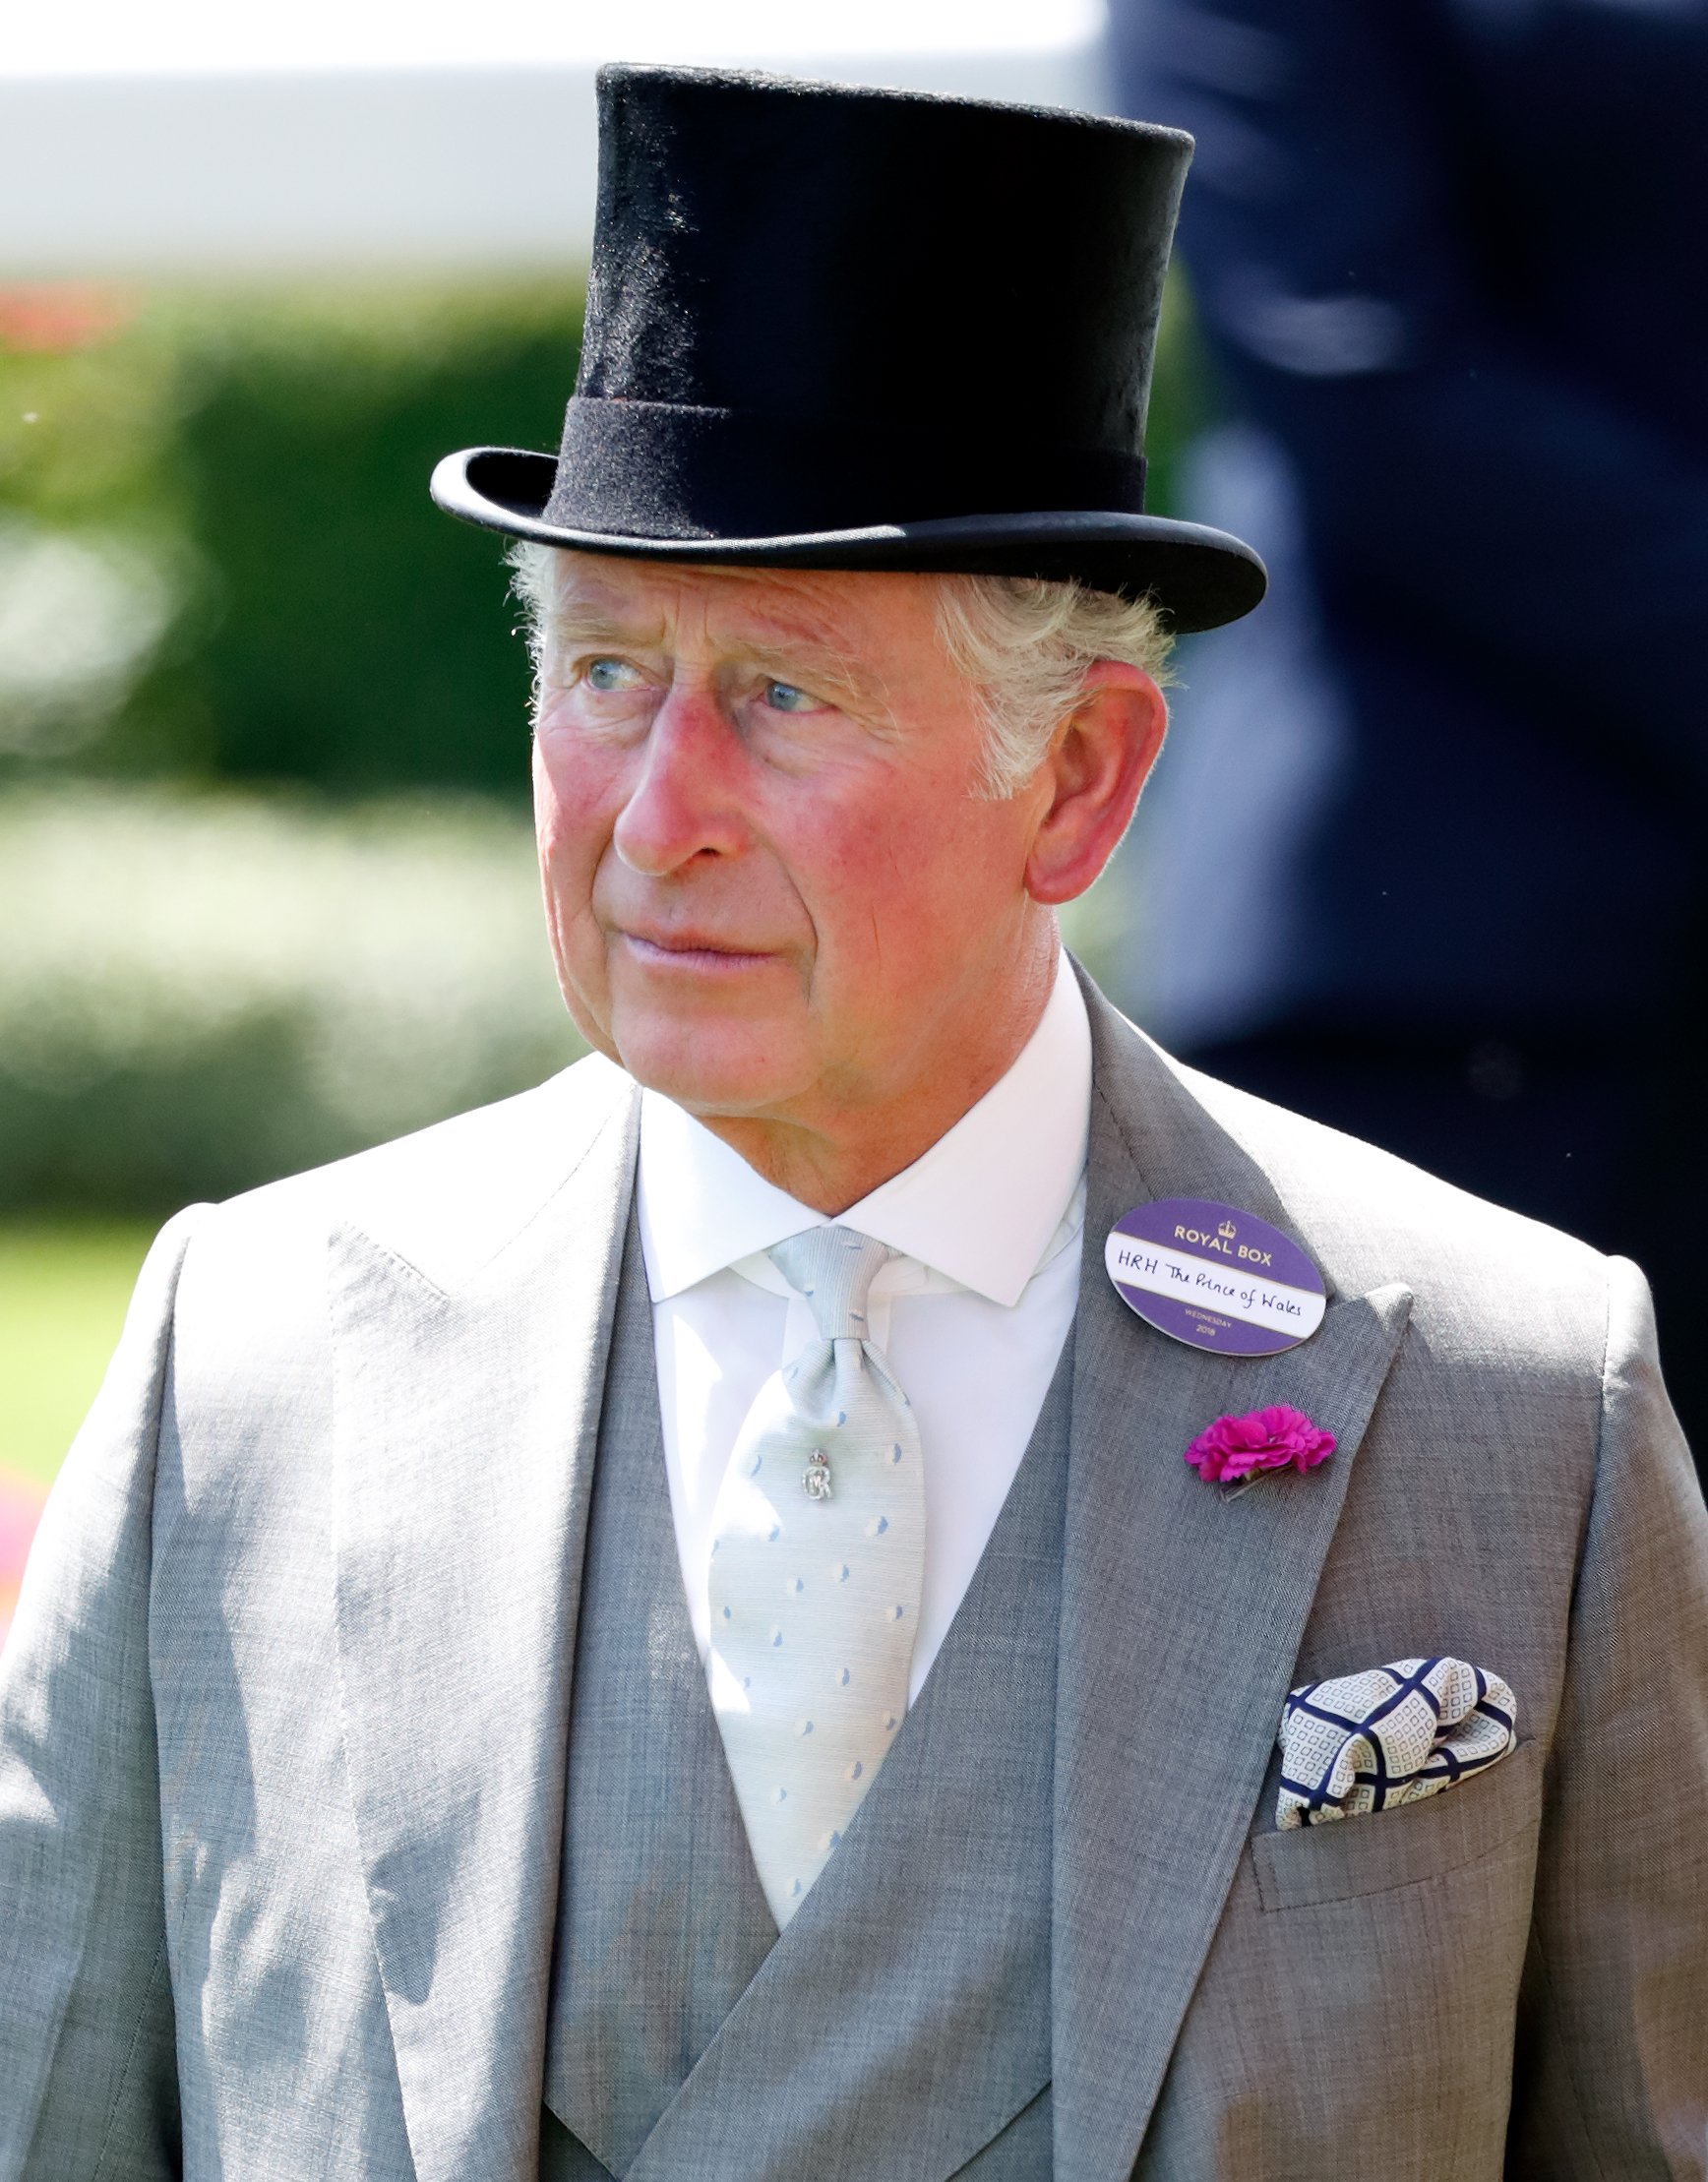 Prince Charles, Prince of Wales attends day 2 of Royal Ascot at Ascot Racecourse on June 20, 2018 in Ascot, England | Photo: Getty Images